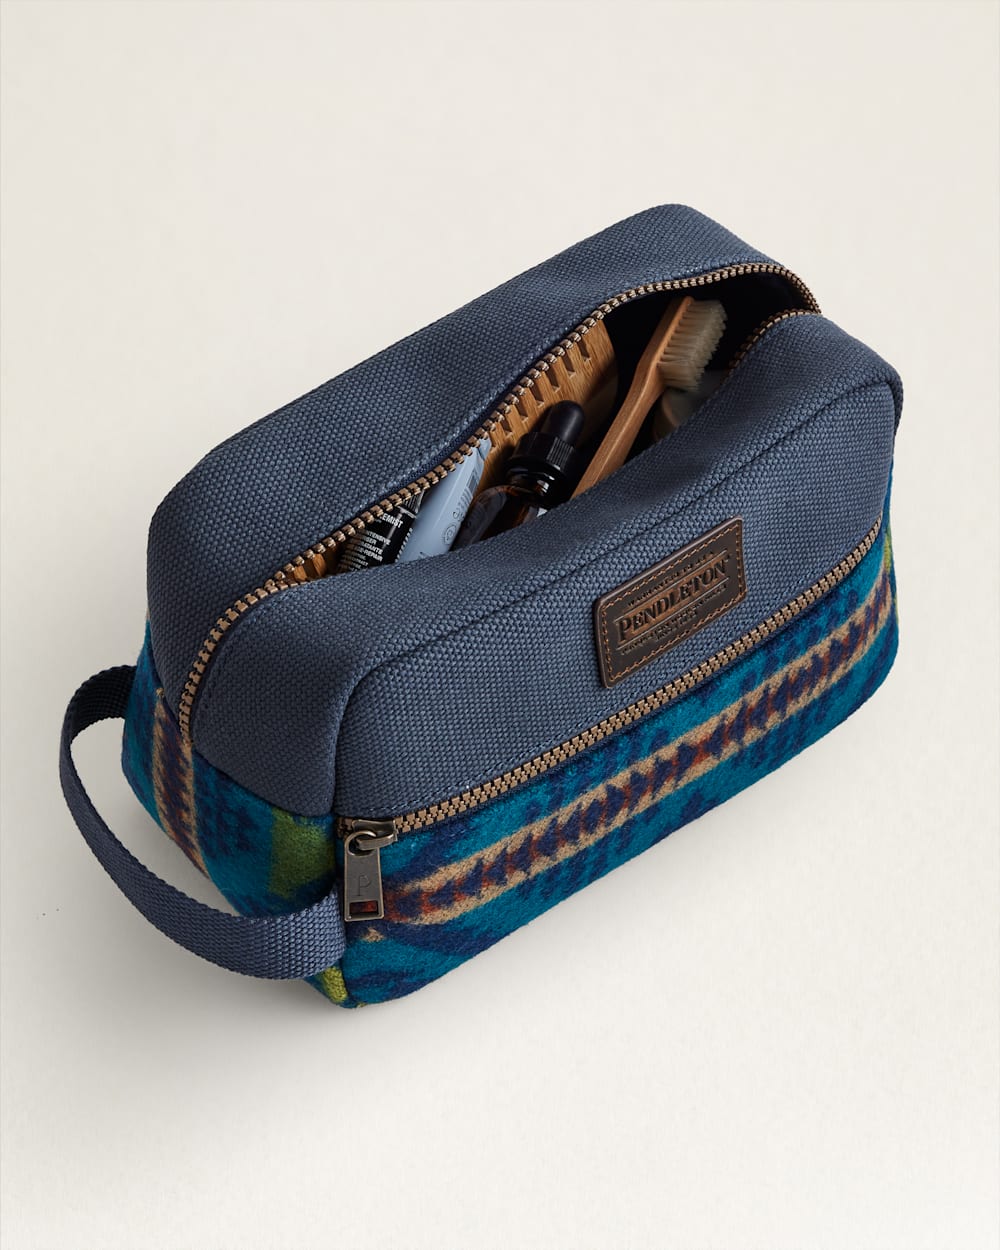 ALTERNATE VIEW OF DIAMOND DESERT CARRYALL POUCH IN BLUE MULTI image number 4